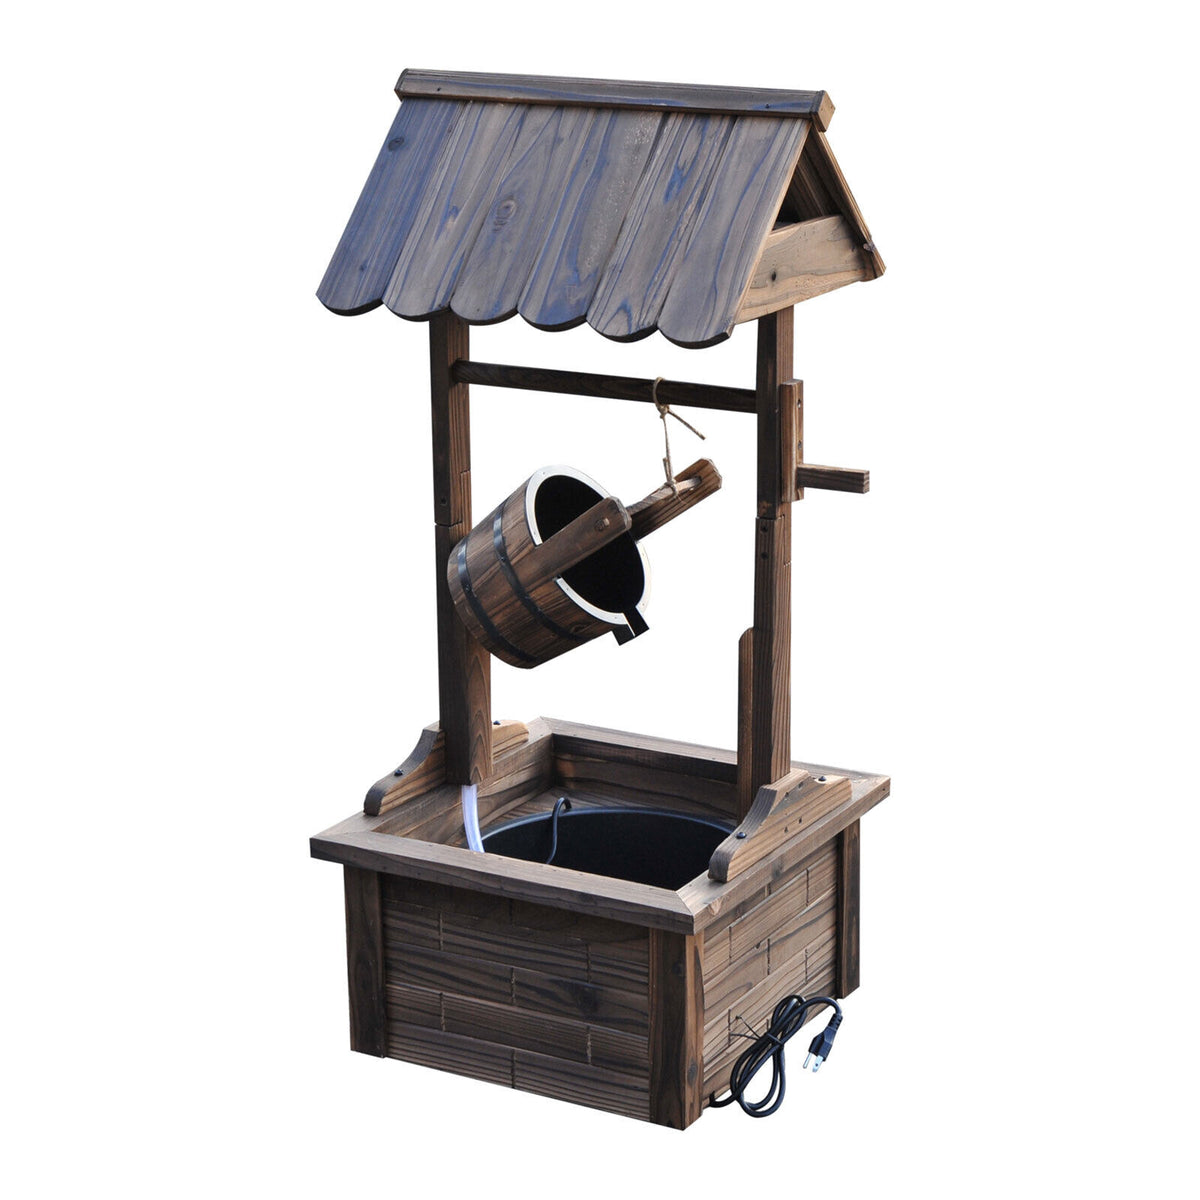 Wooden Wishing Well Outdoor Water Fountain With Pump For Garden & Yard